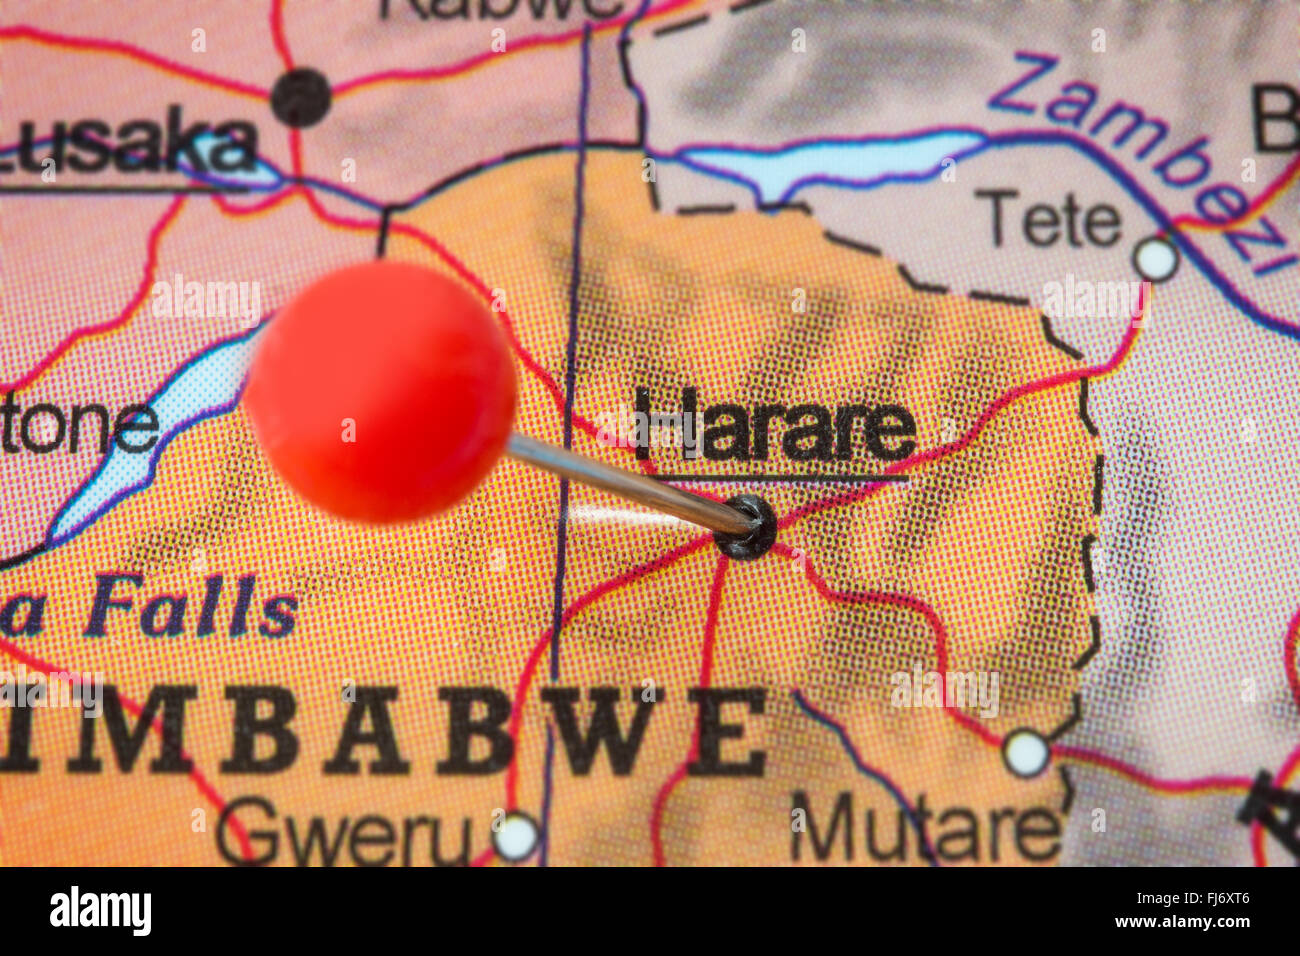 Close-up of a red pushpin in a map of Harare, Zimbabwe. Stock Photo